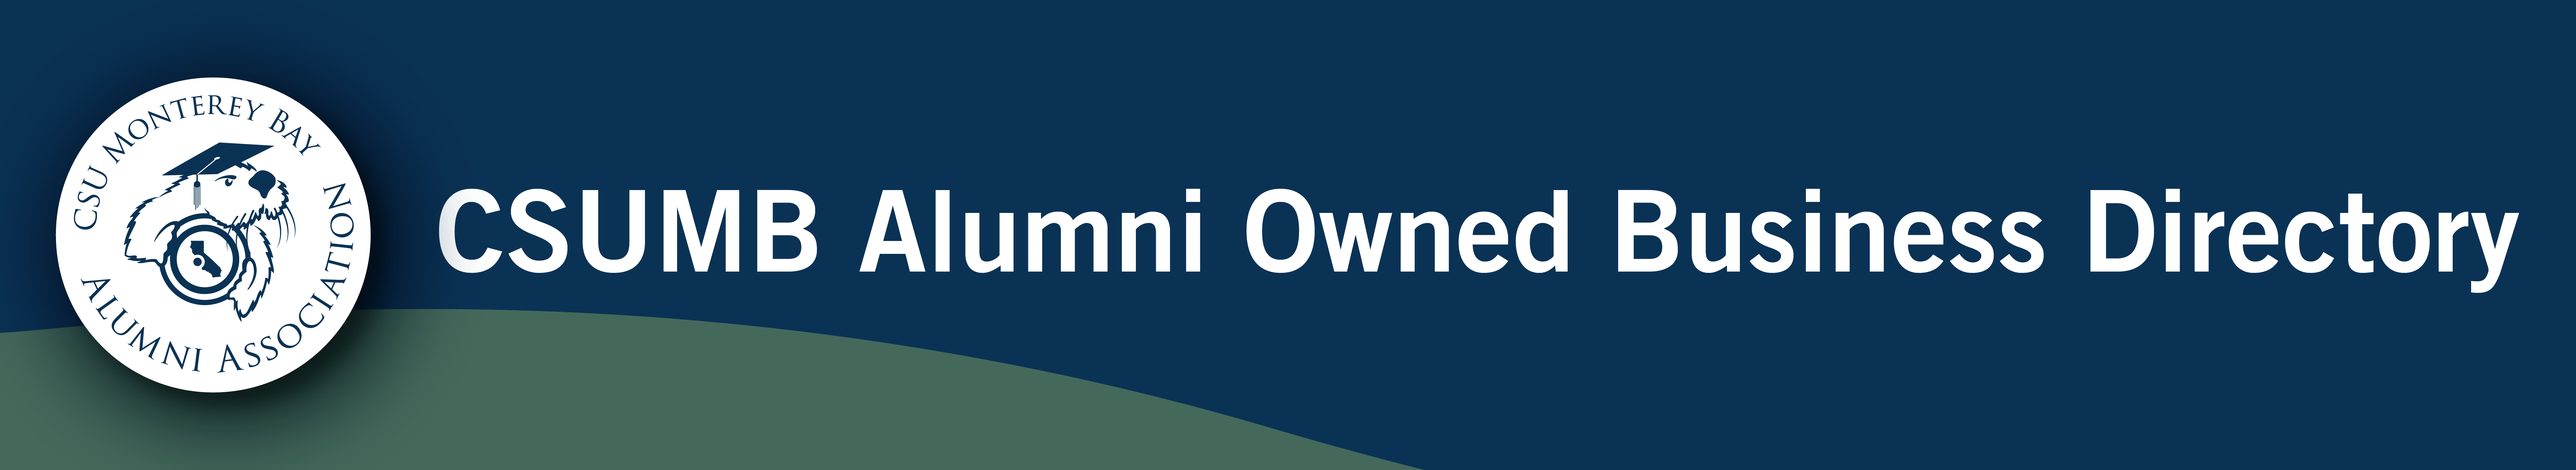 Banner text: CSUMB Alumni Owned Business Directory with Alumni Association Logo